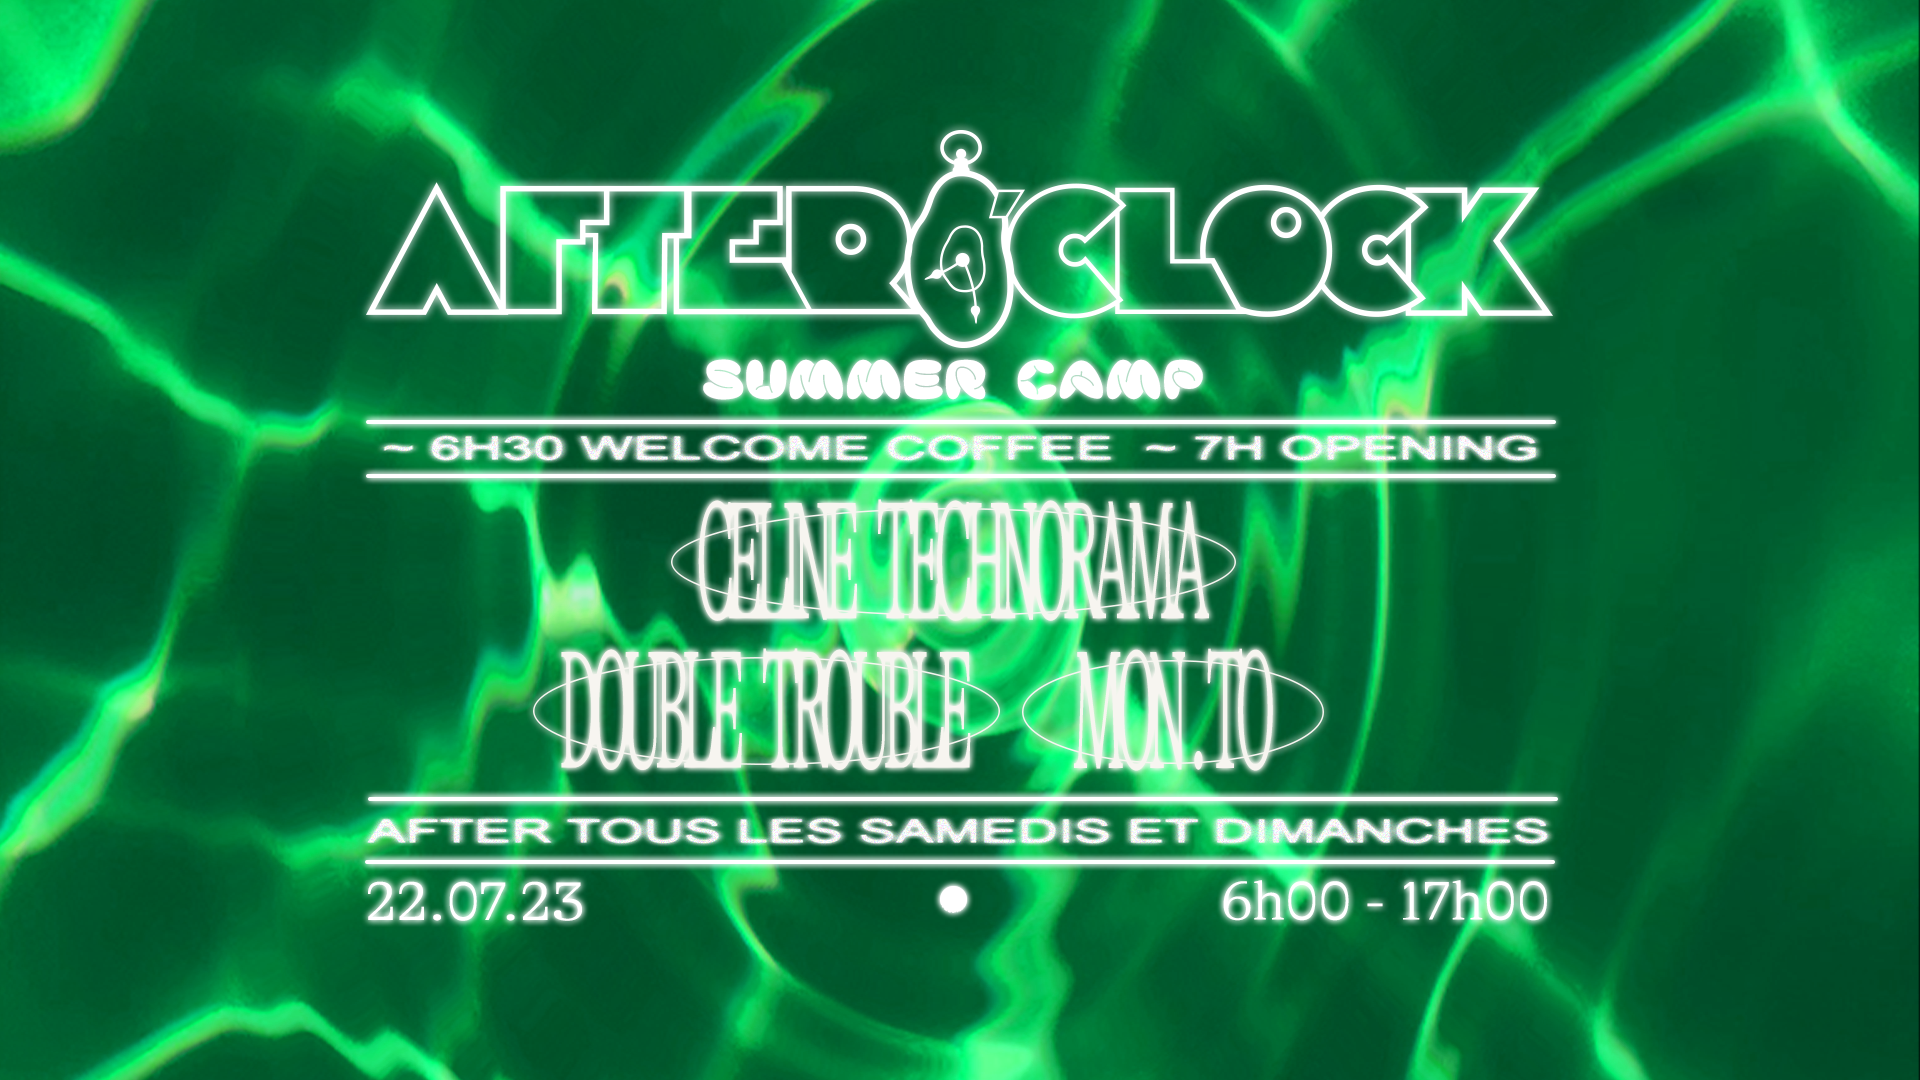 After O'Clock: Double Trouble, Celine Technorama & Mon.To - フライヤー表